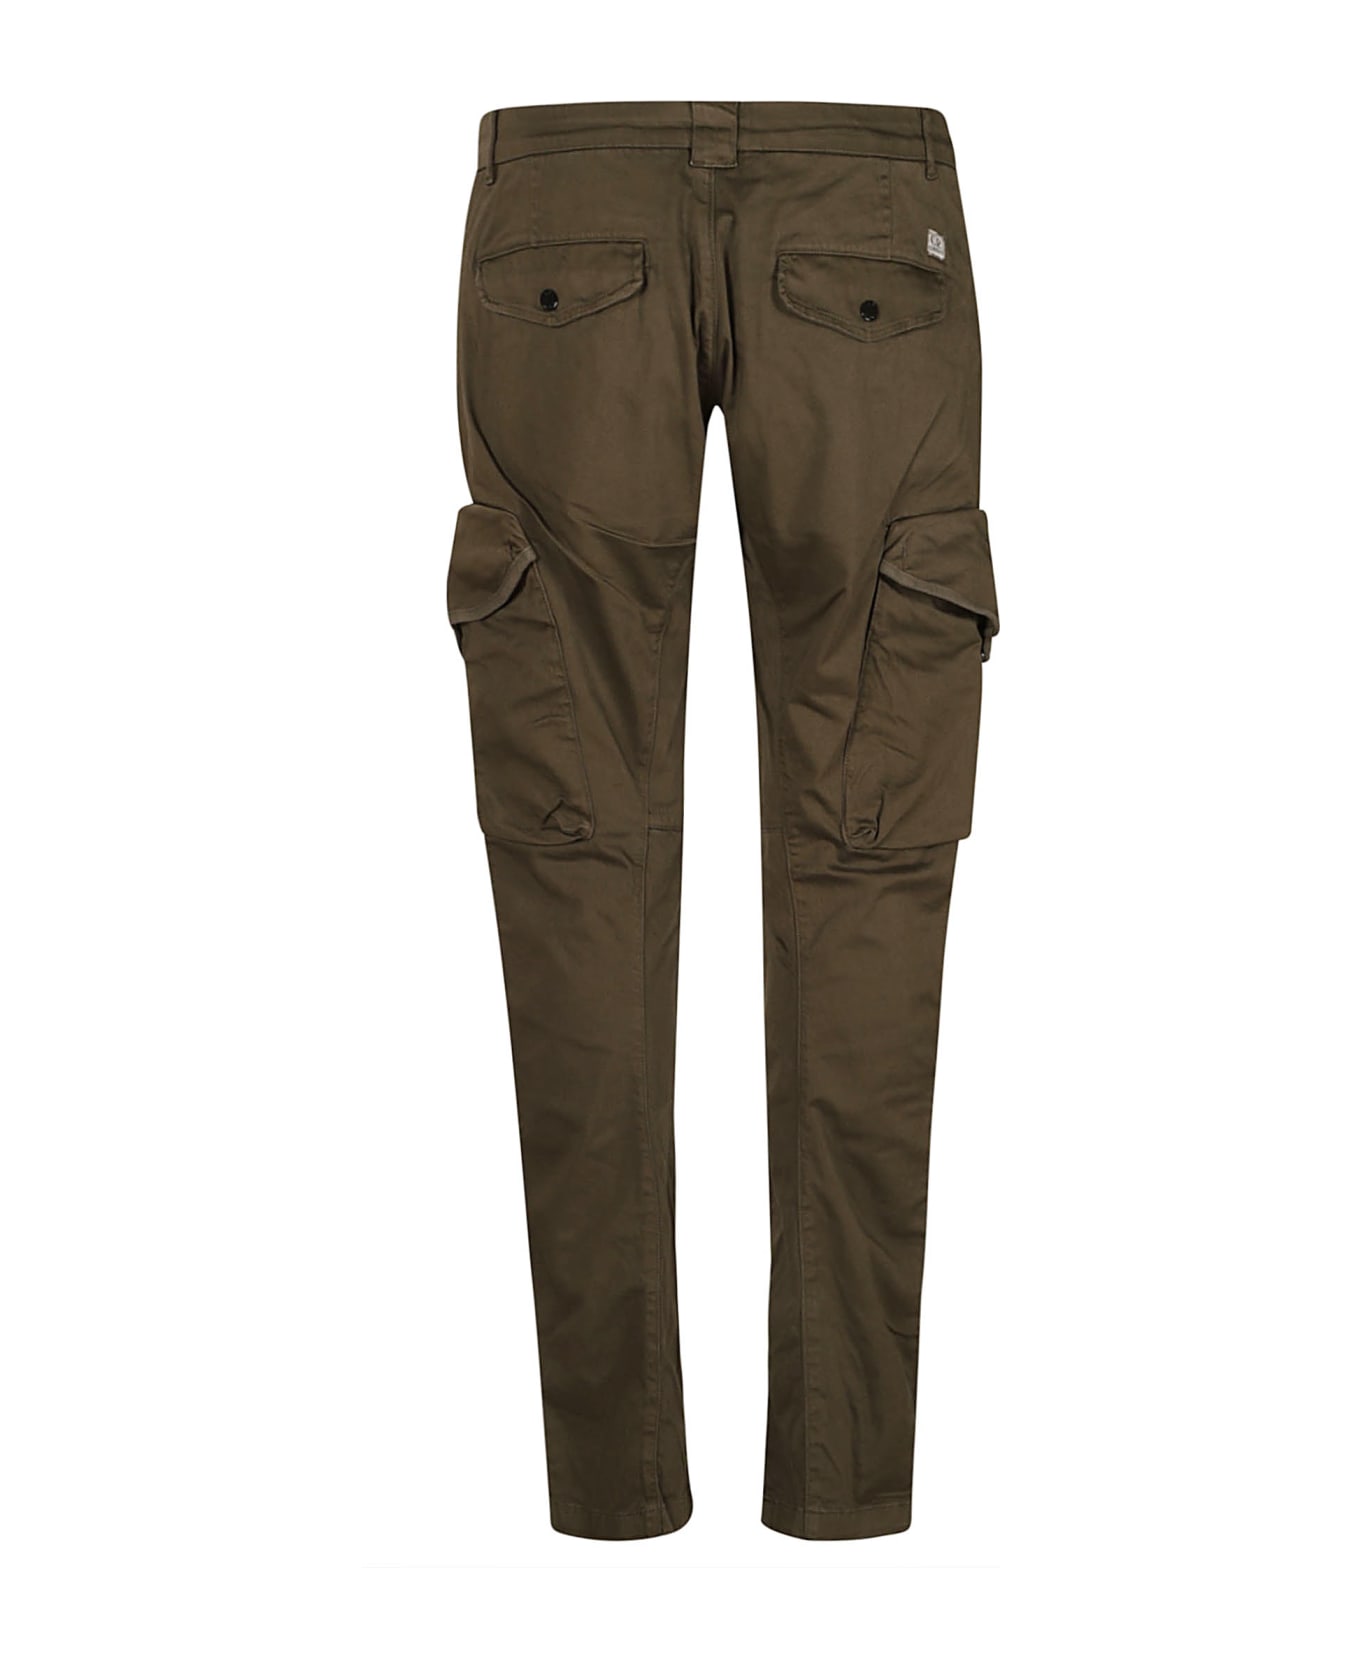 C.P. Company Cargo Buttoned Trousers - IVY GREEN